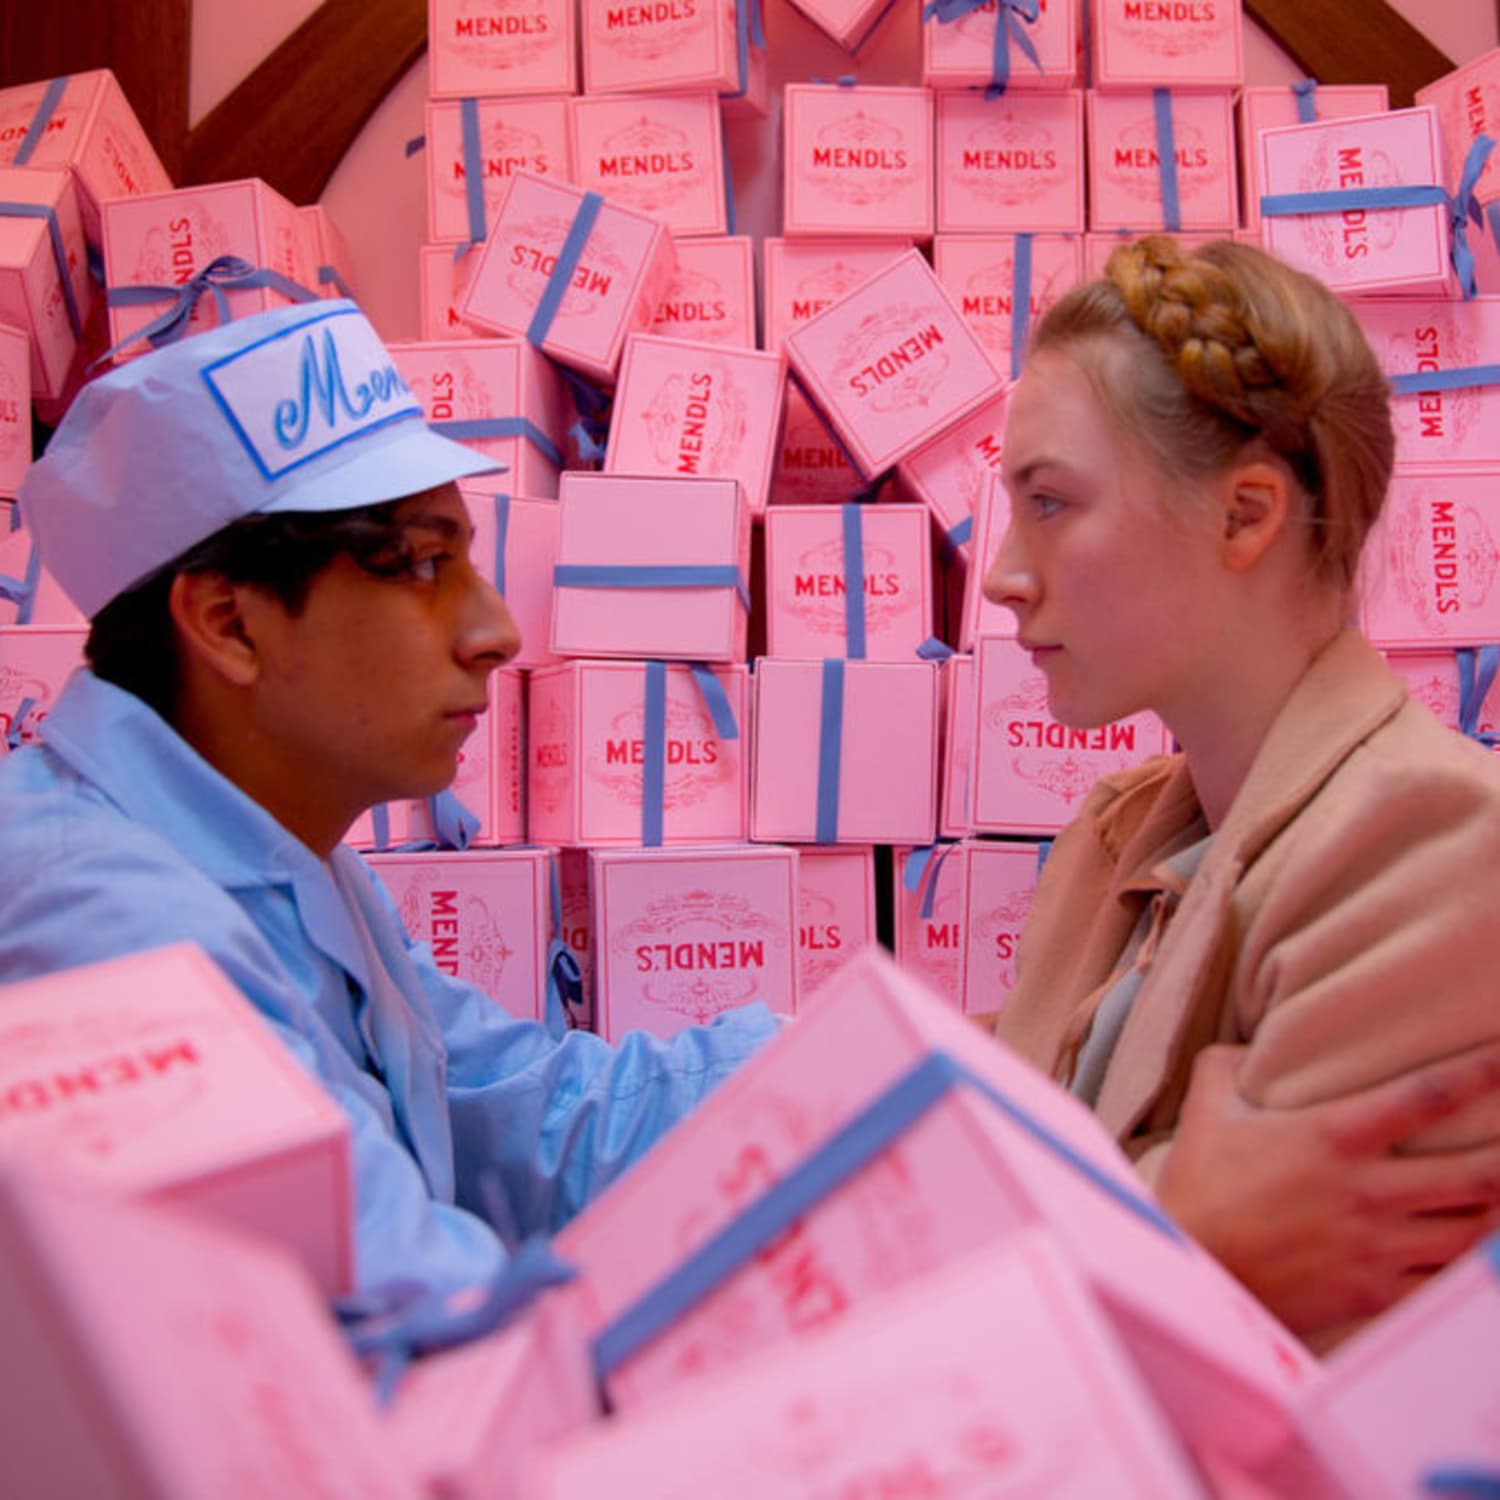 Pin on Wes Anderson's World